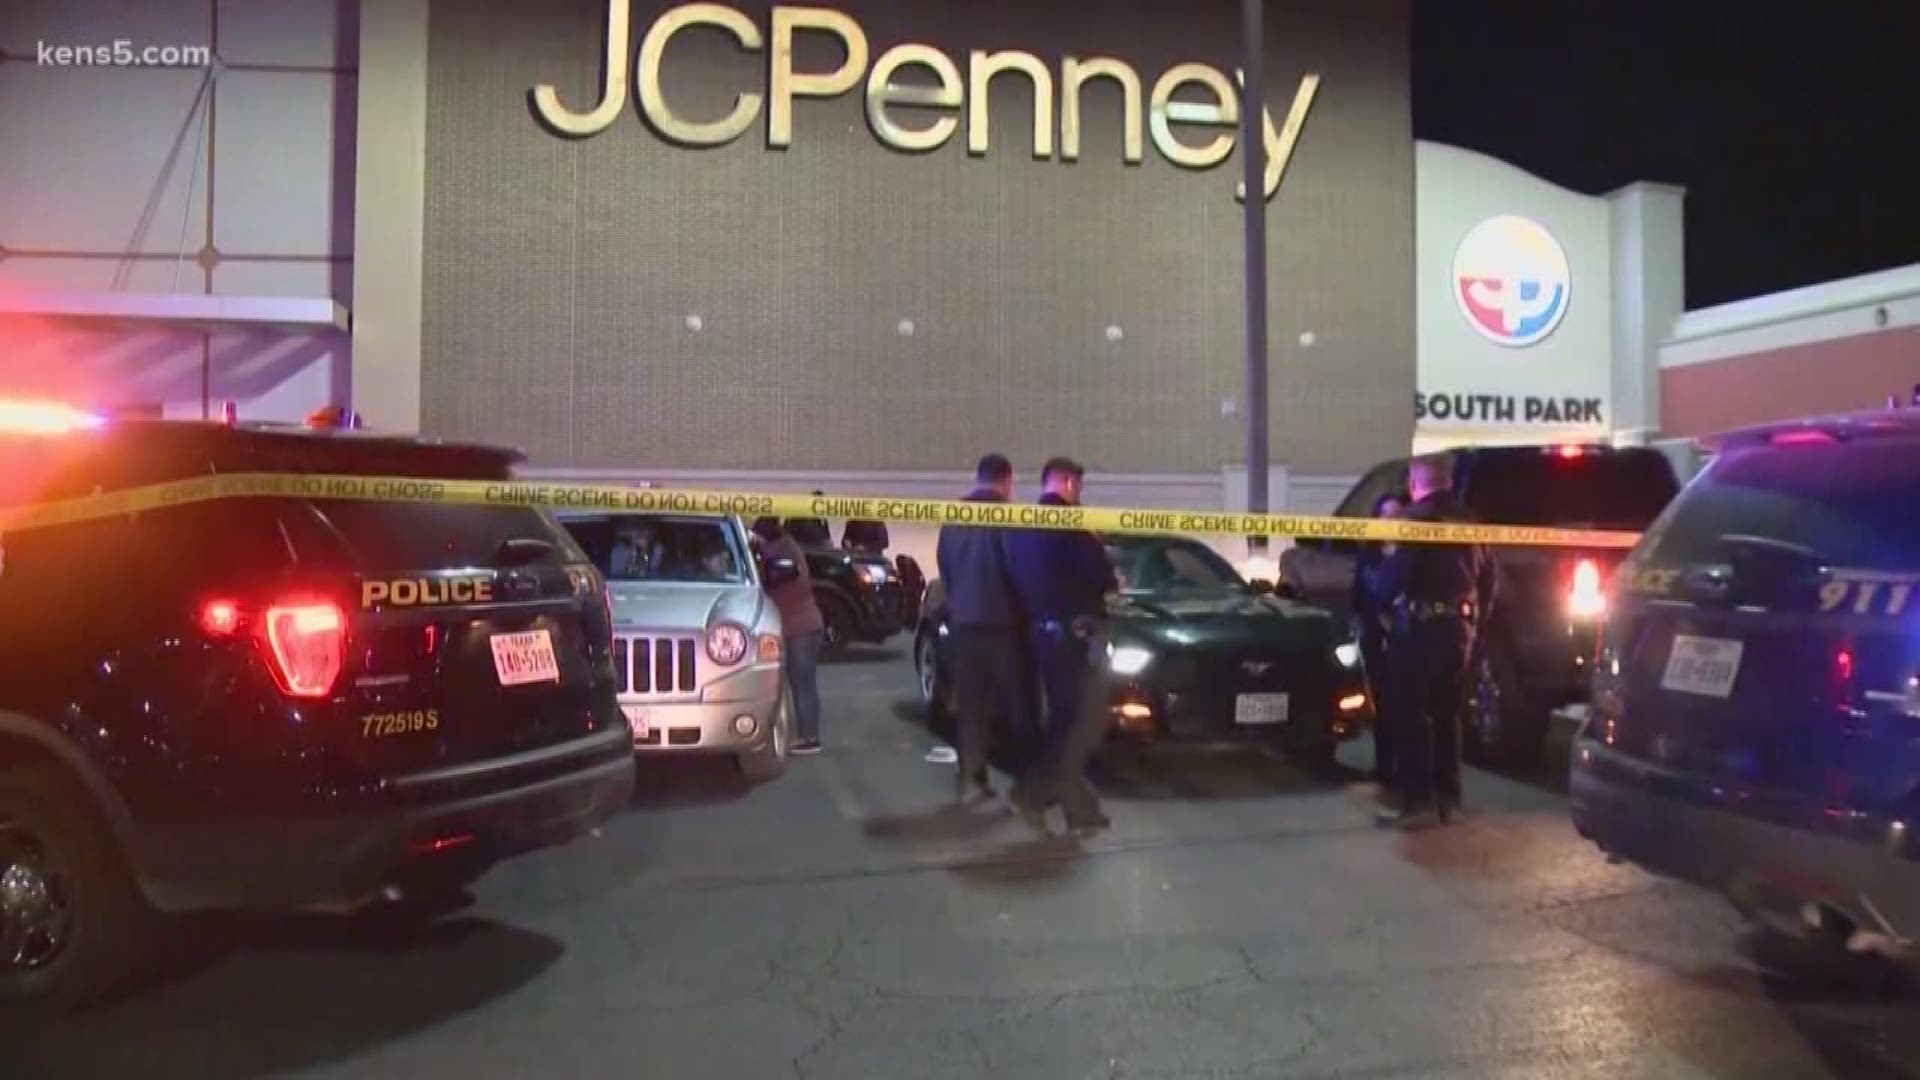 Gunfire erupted at the South Park Mall Wednesday night. Authorities said on Thursday that it was not a random shooting.